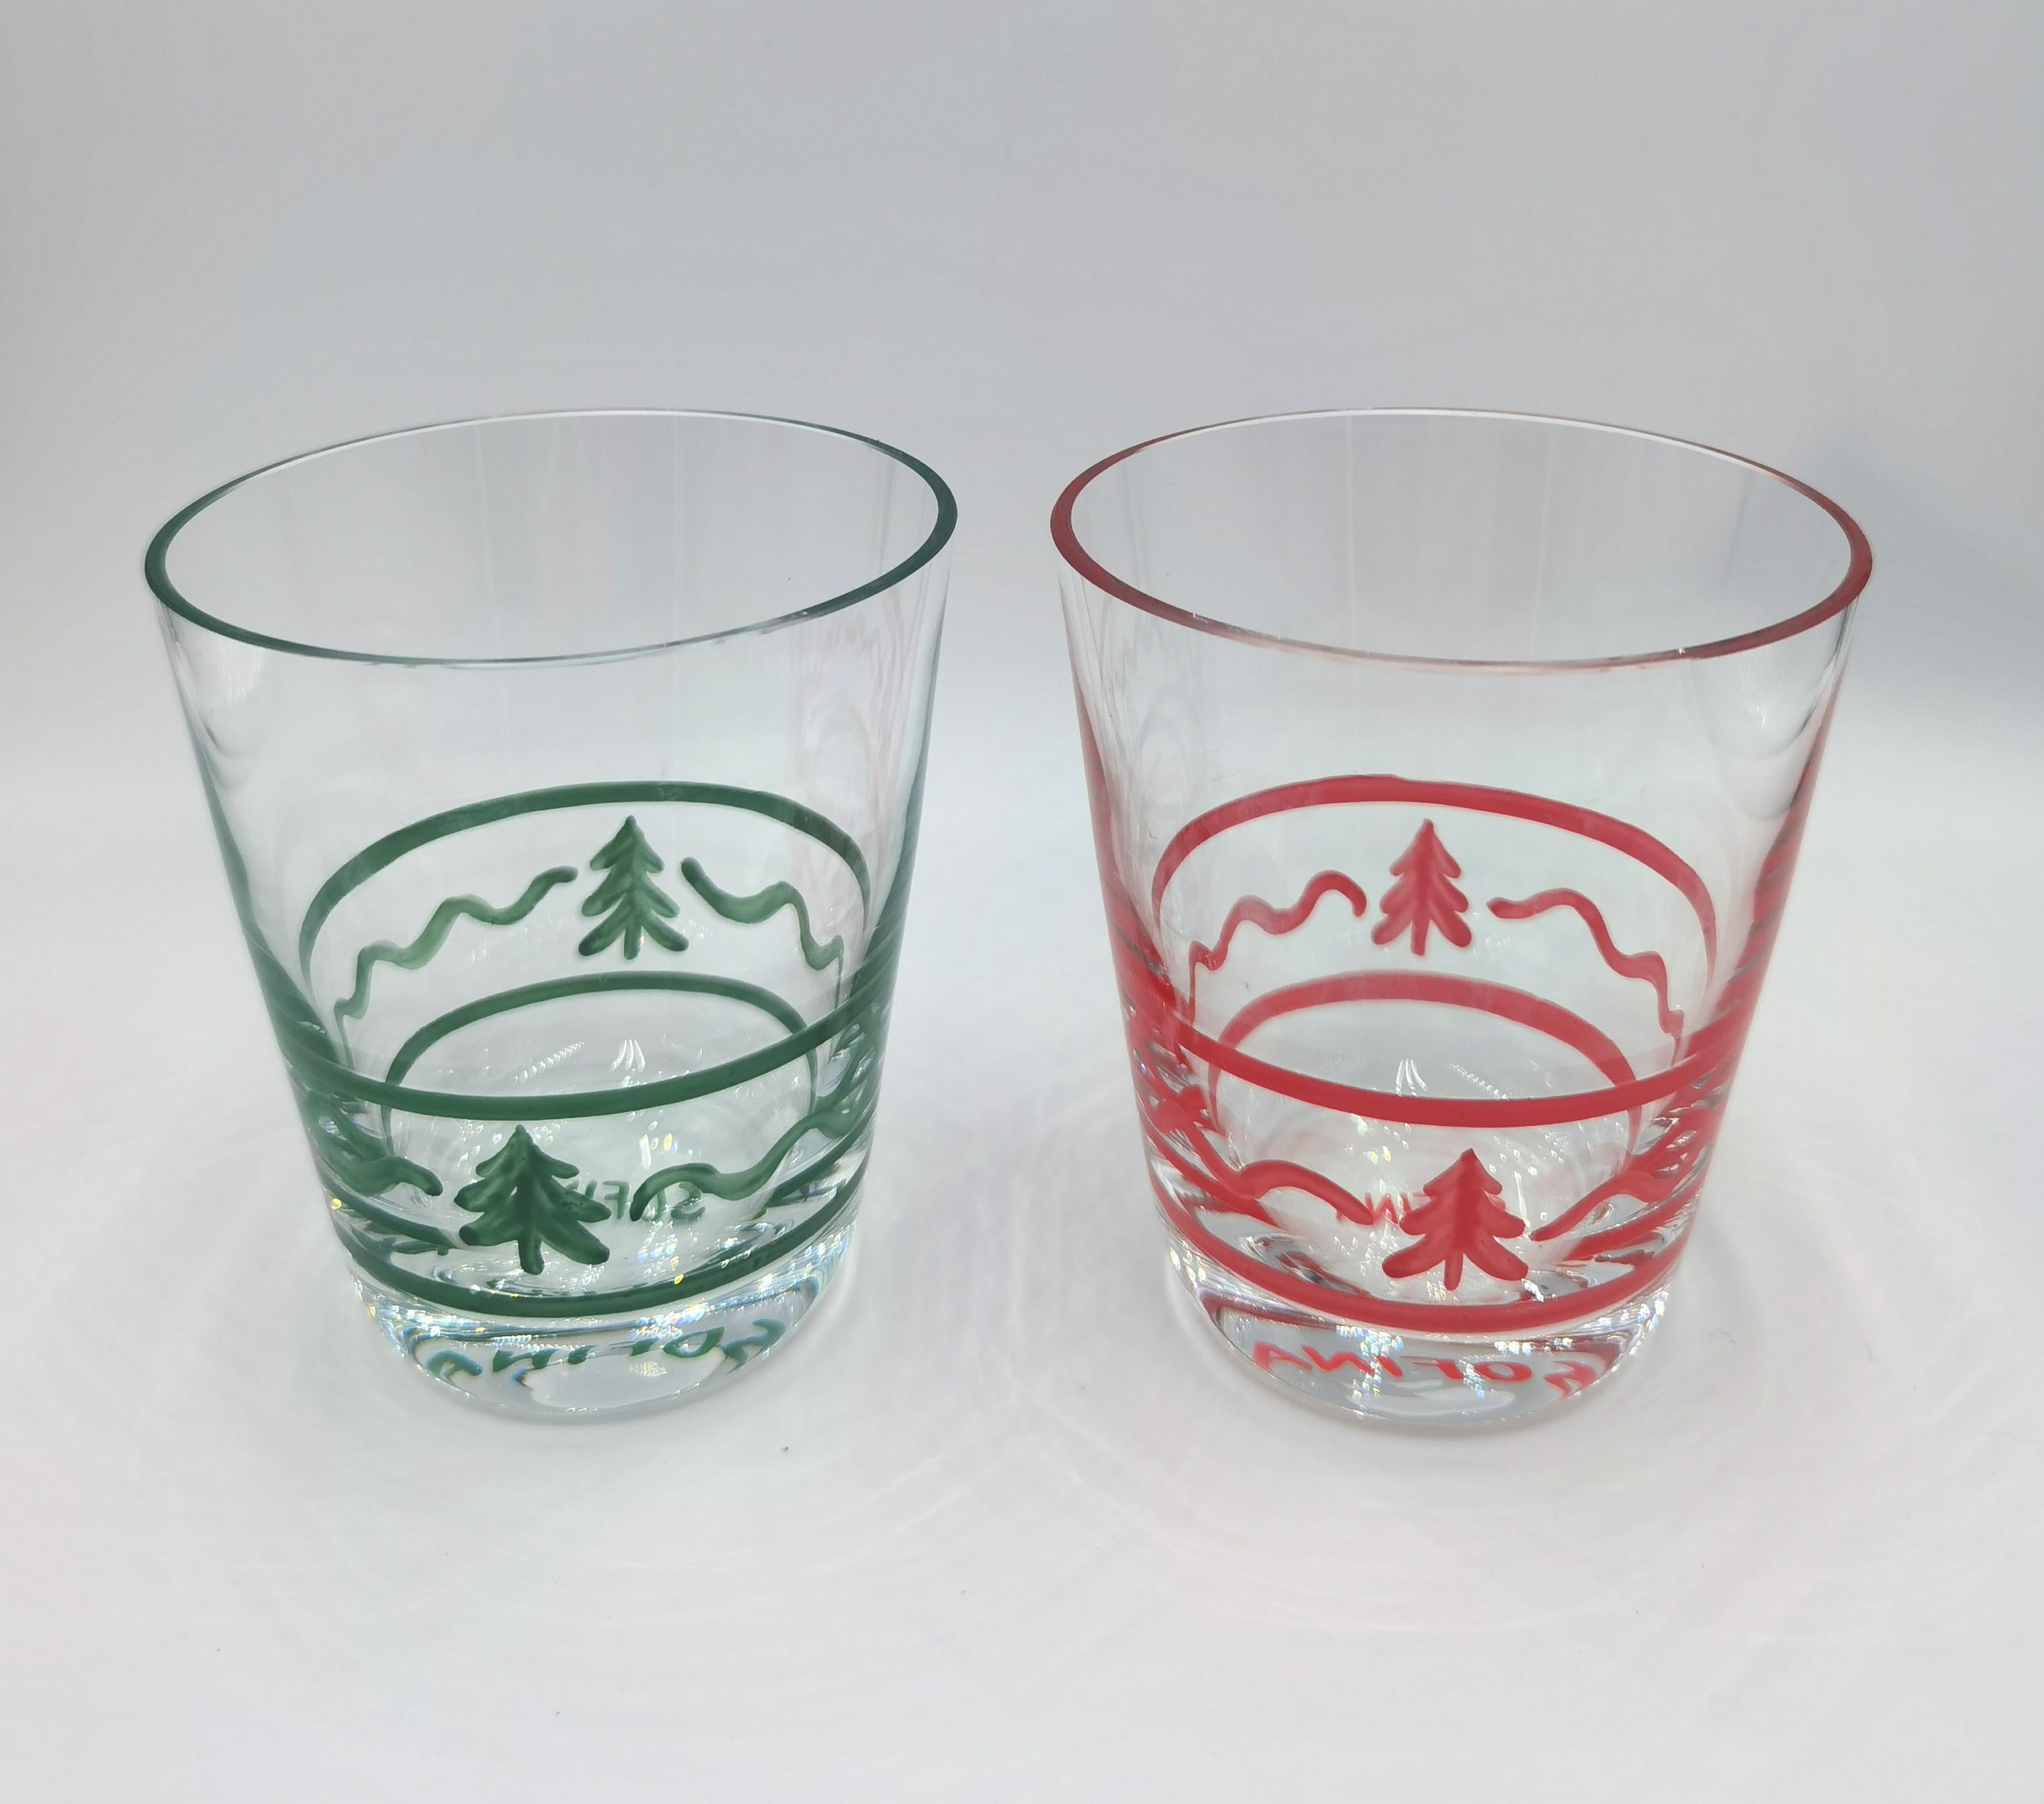 Set of six hand blown tumbler hands-free painted in Black Forest style. Each glass is handsfree painted with different rims and trees in green colors. Can be ordered in mixed colors green red or in one color. A matching carafe can be ordered in